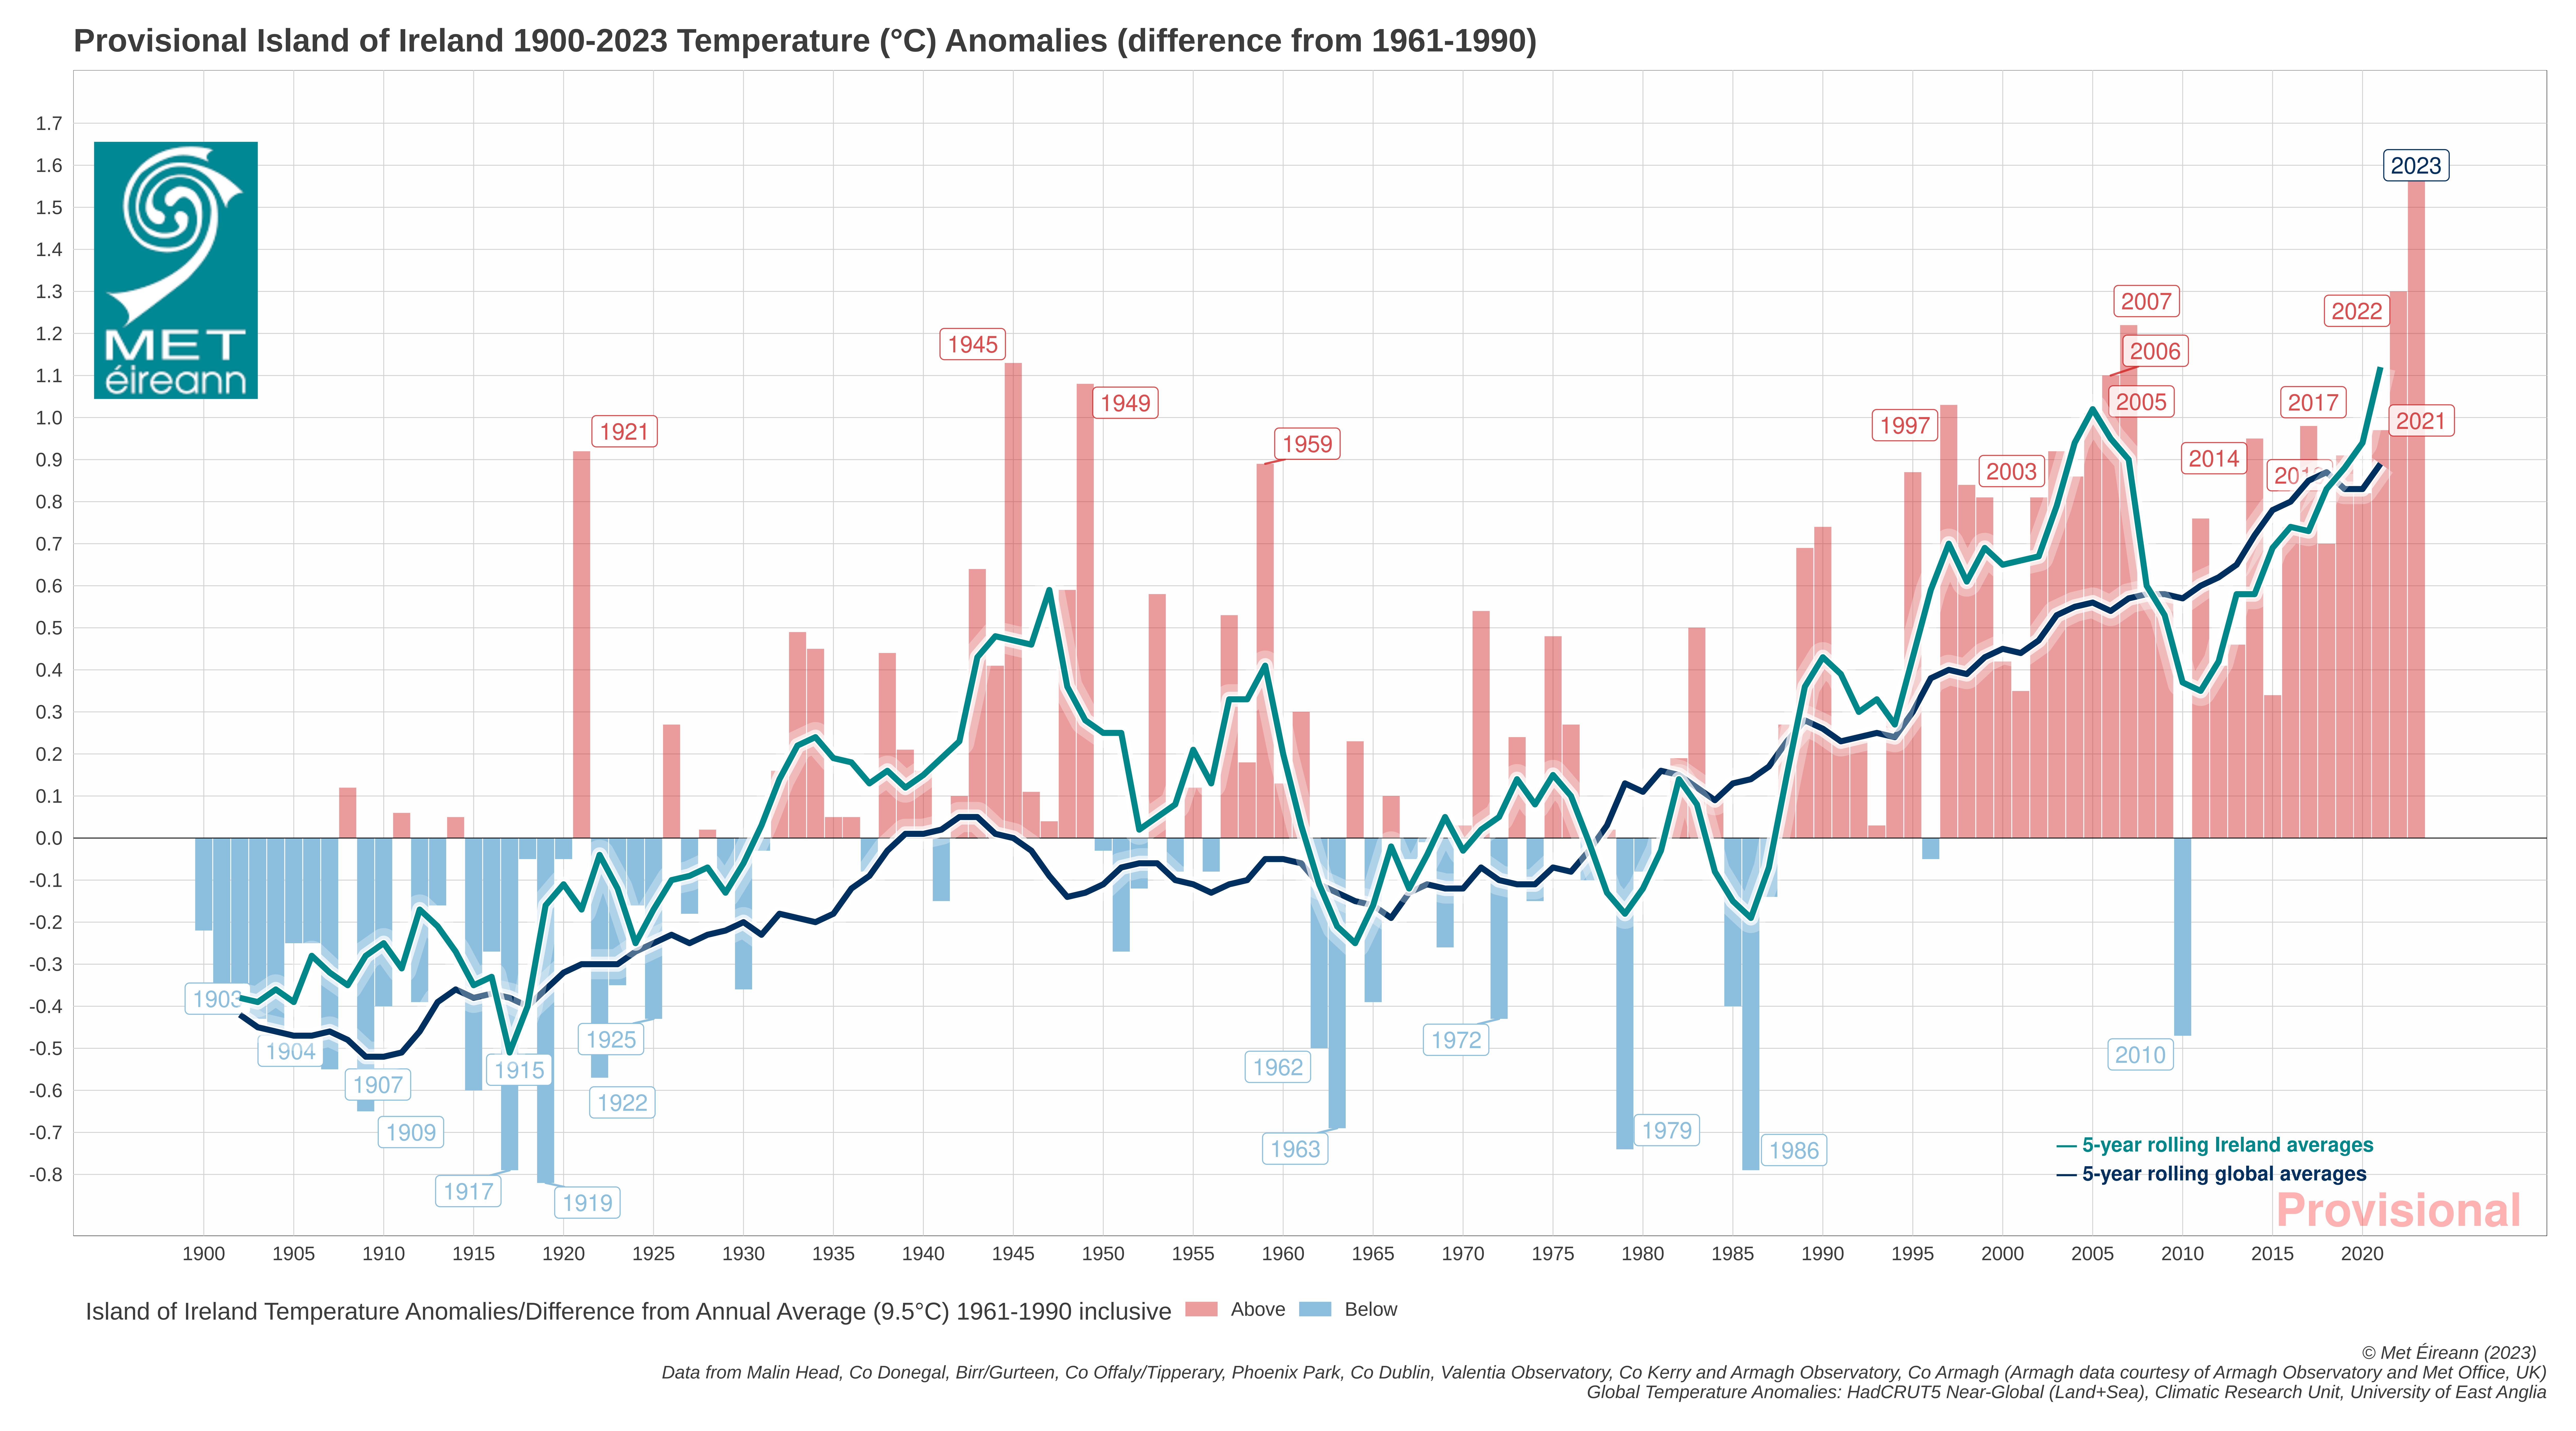 Island of Ireland annual average temperature anomalies 1961-1990 Long-Term Average from 1900 to 2023 